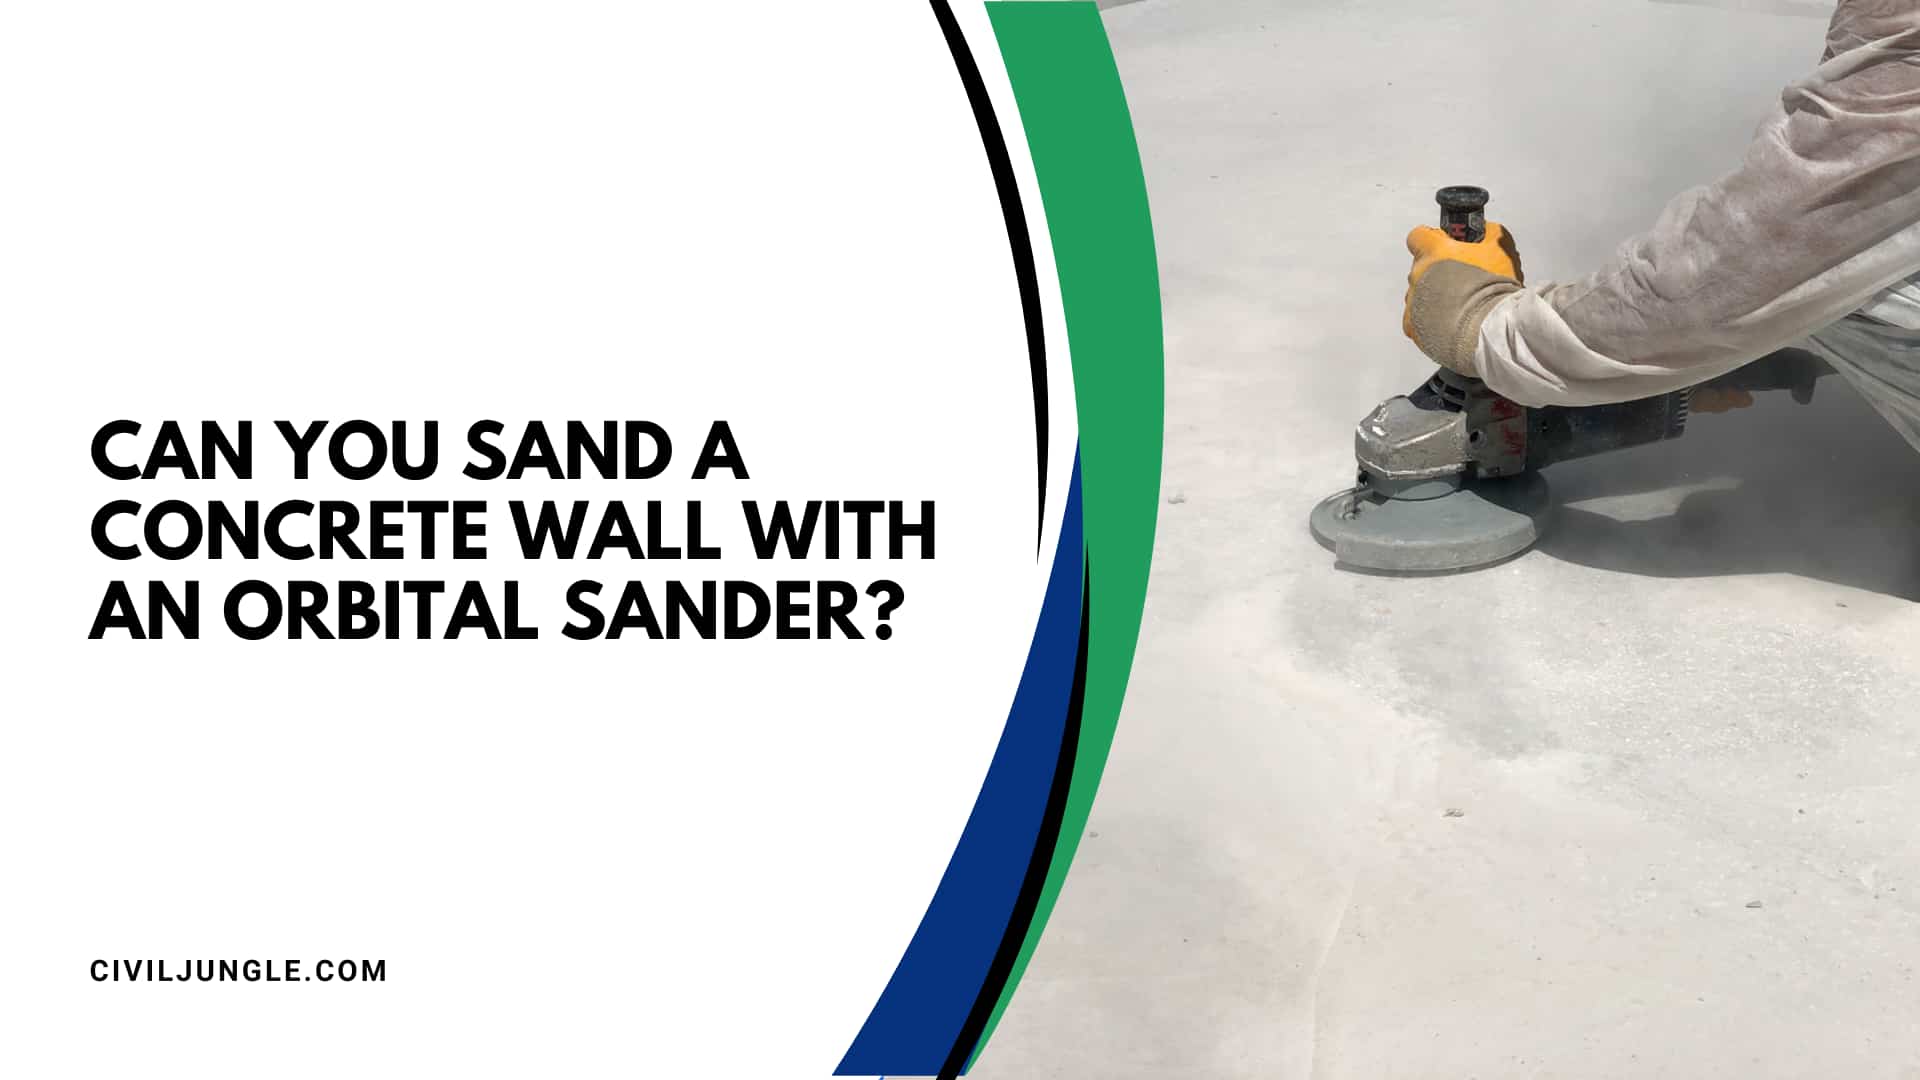 Can You Sand A Concrete Wall With An Orbital Sander?